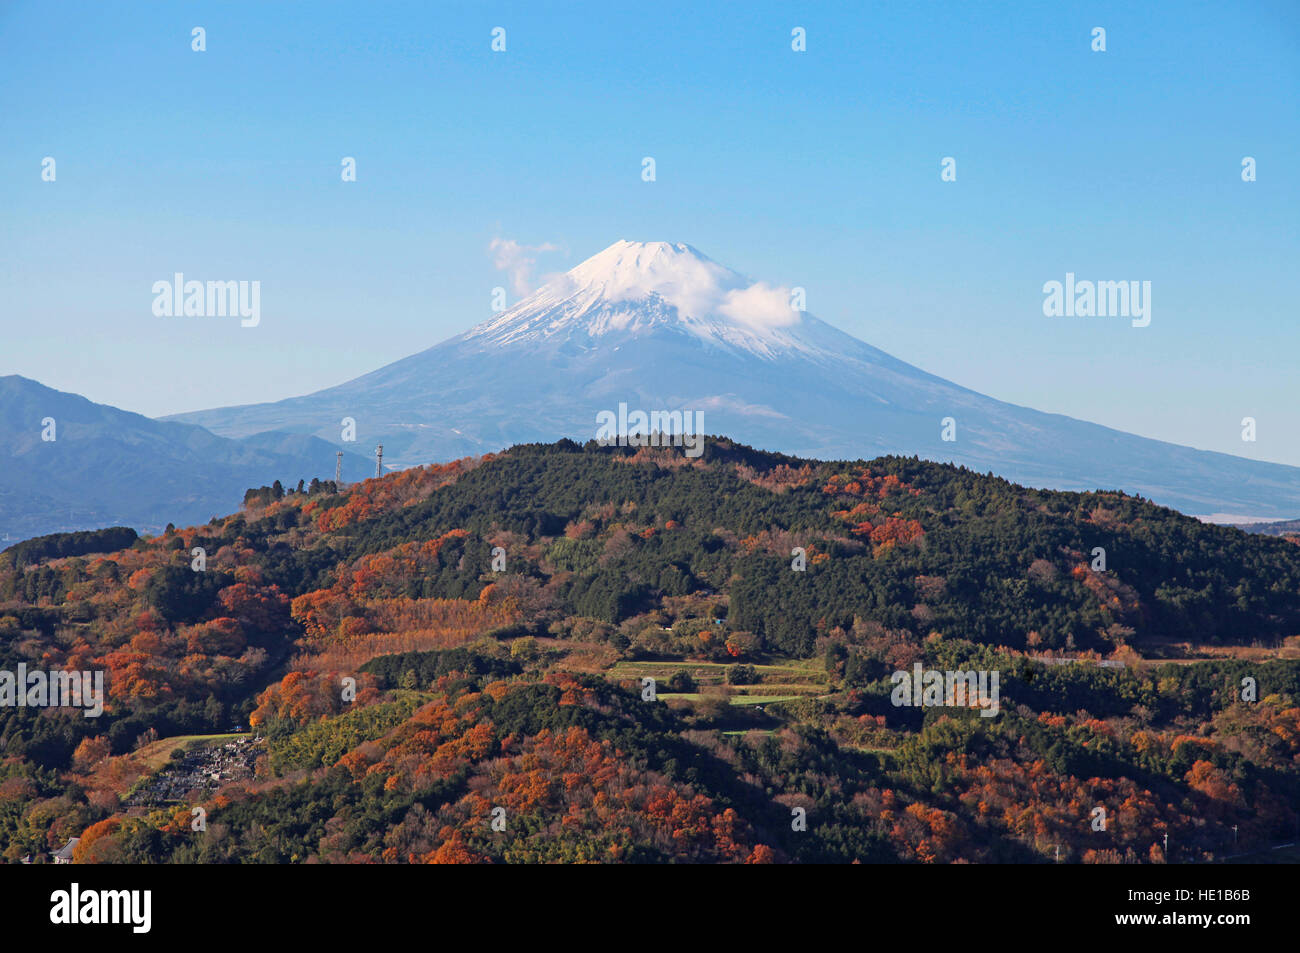 Snow-capped Mount Fuji in Japan Stock Photo